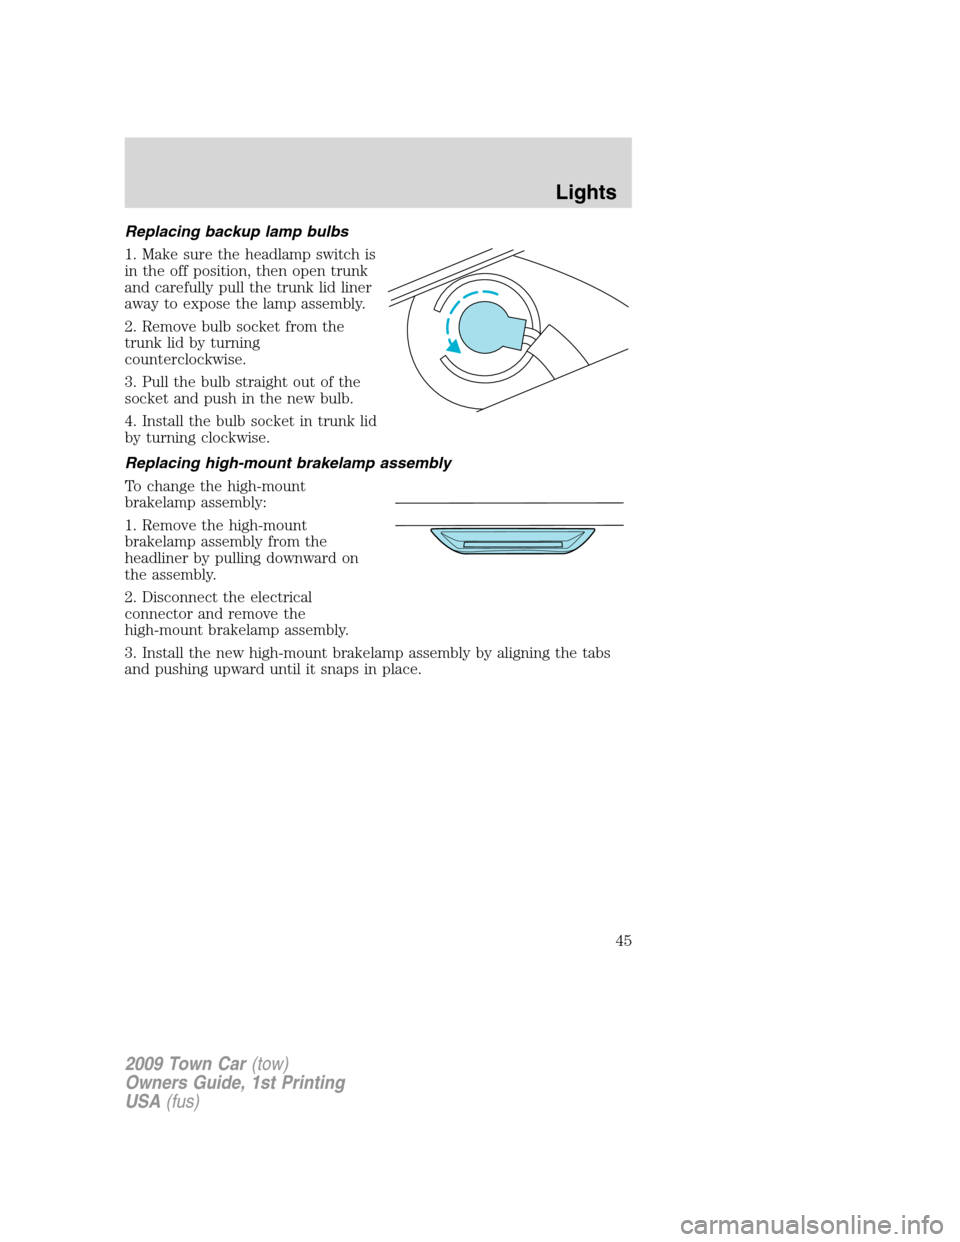 LINCOLN TOWN CAR 2009 Service Manual Replacing backup lamp bulbs
1. Make sure the headlamp switch is
in the off position, then open trunk
and carefully pull the trunk lid liner
away to expose the lamp assembly.
2. Remove bulb socket from